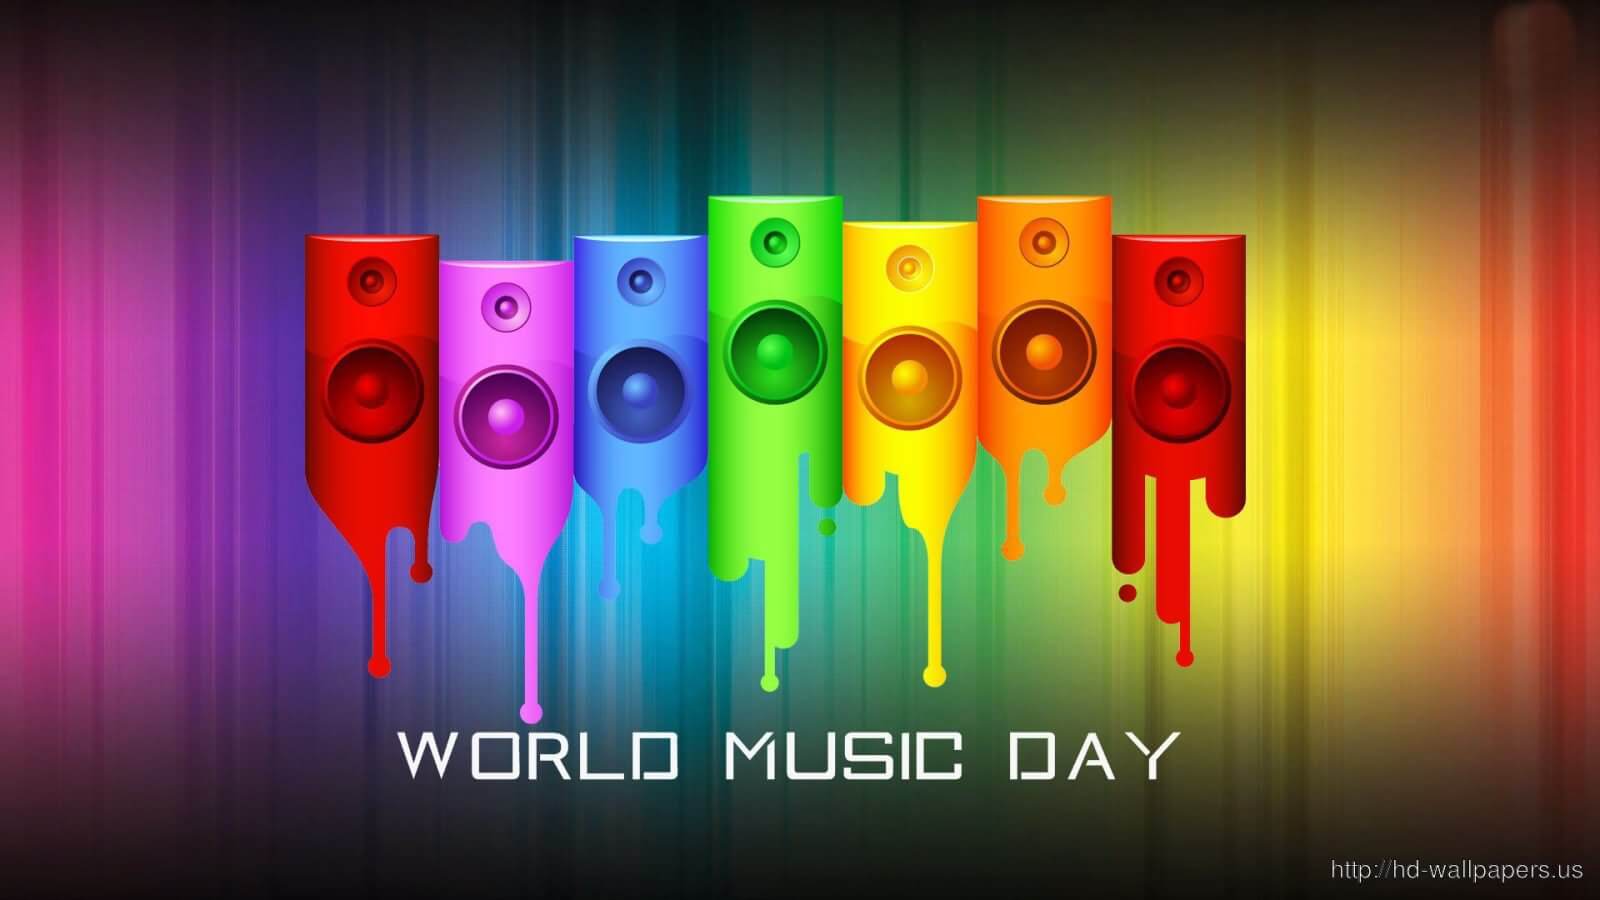 World music day wallpapers